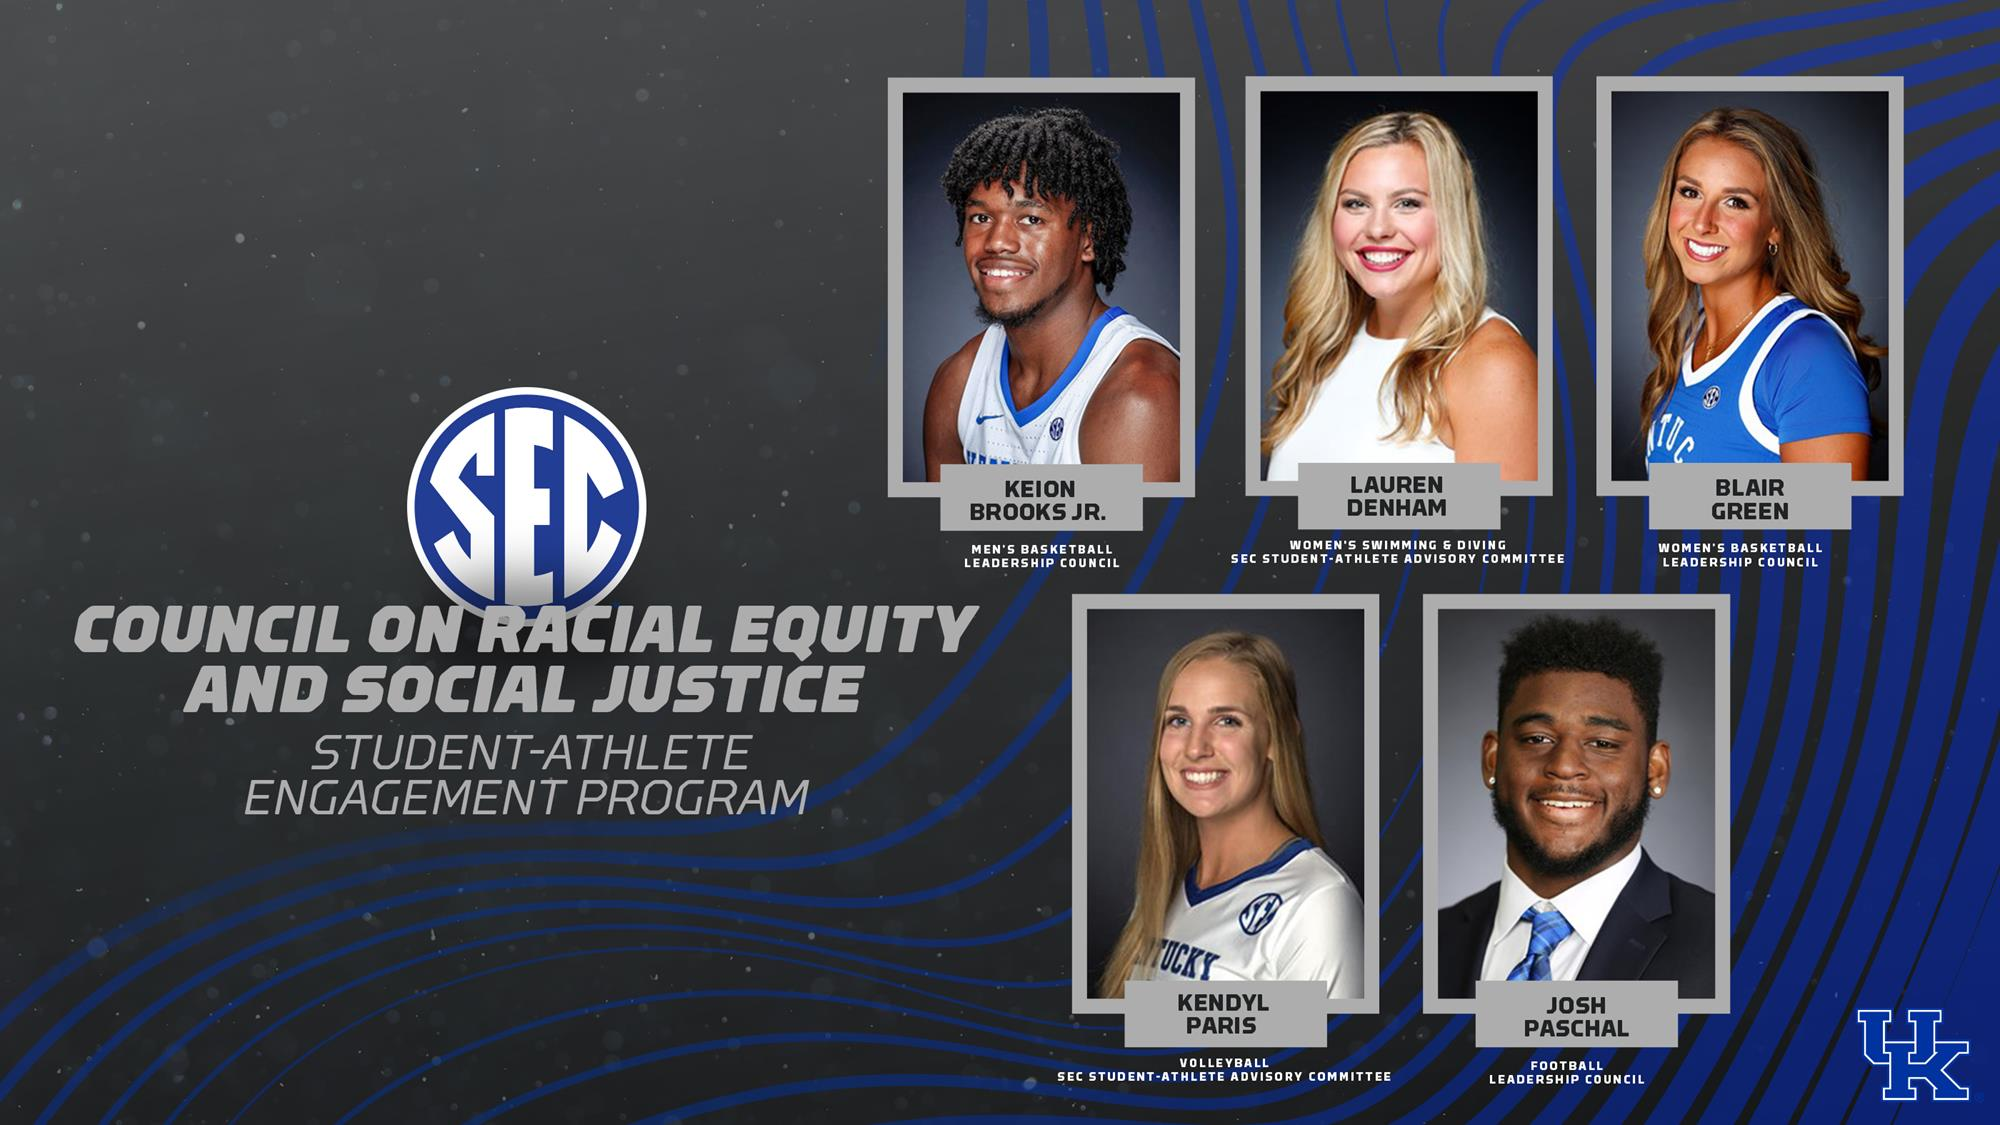 Eight UK Athletics Representatives Join SEC Council on Racial Equity and Social Justice